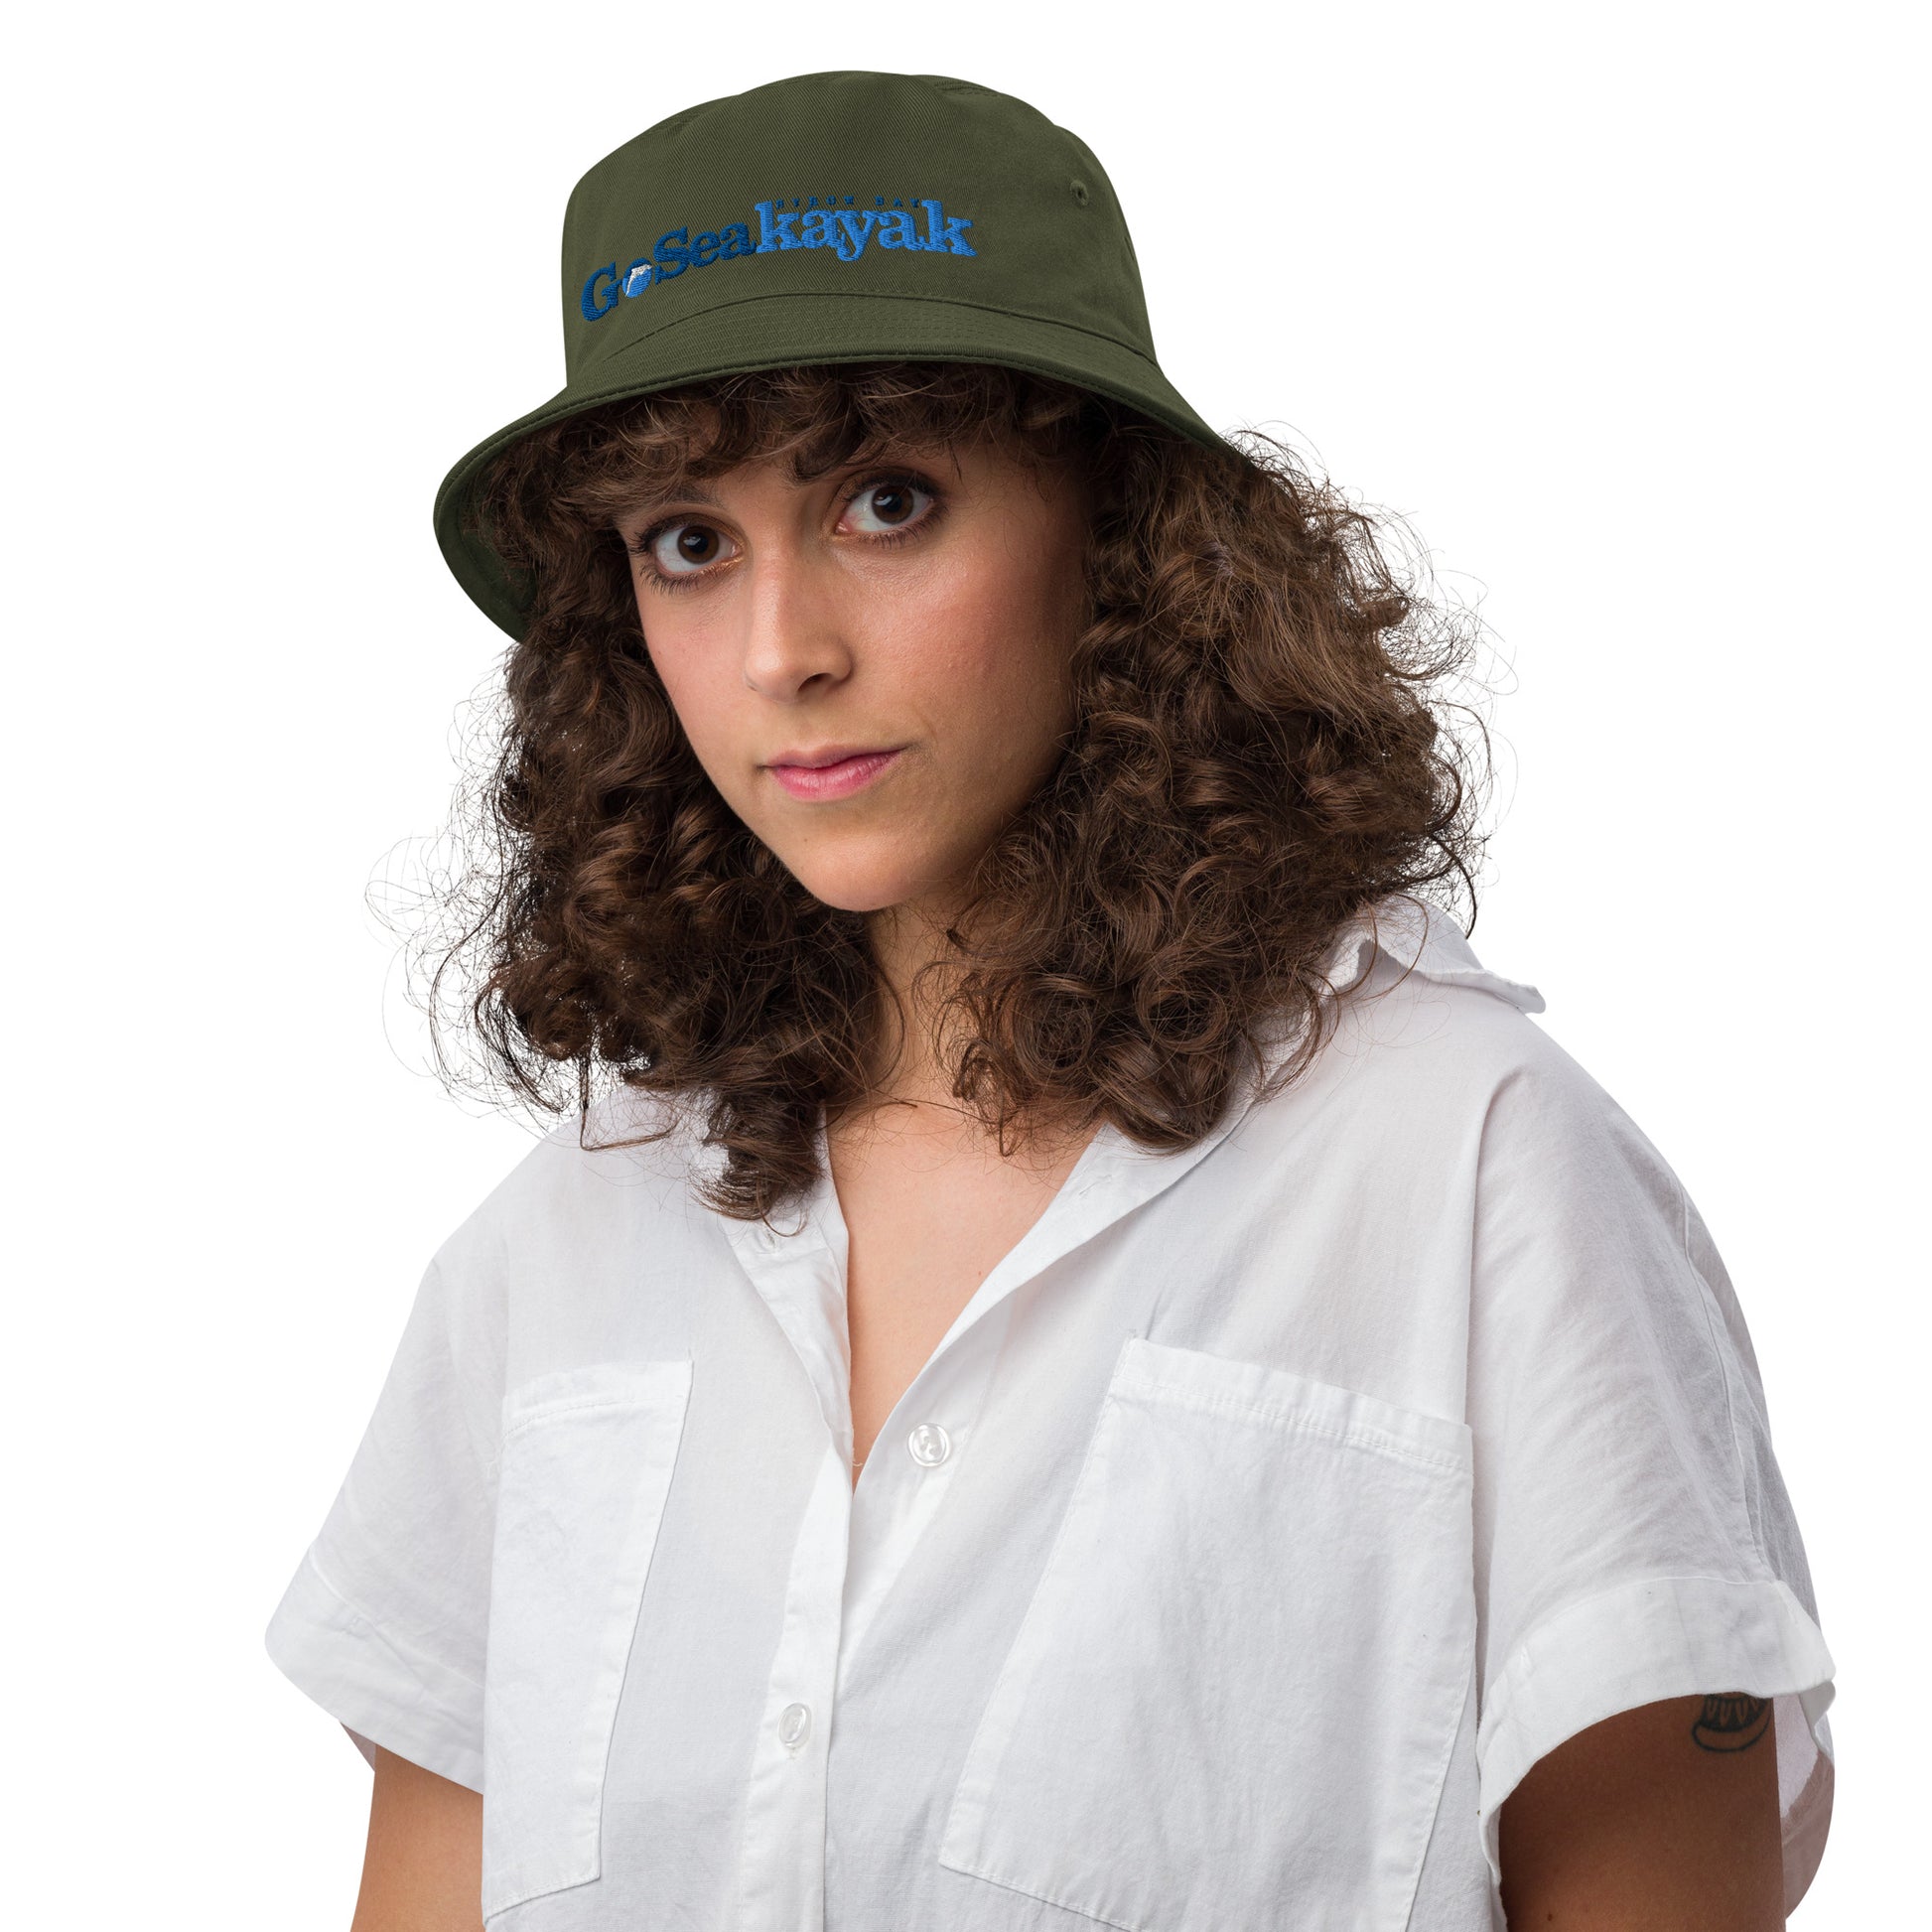  Unisex Bucket Hat - Army Green - Front view on woman's head - Go Sea Kayak Byron Bay logo on front  - Genuine Byron Bay Merchandise | Produced by Go Sea Kayak Byron Bay